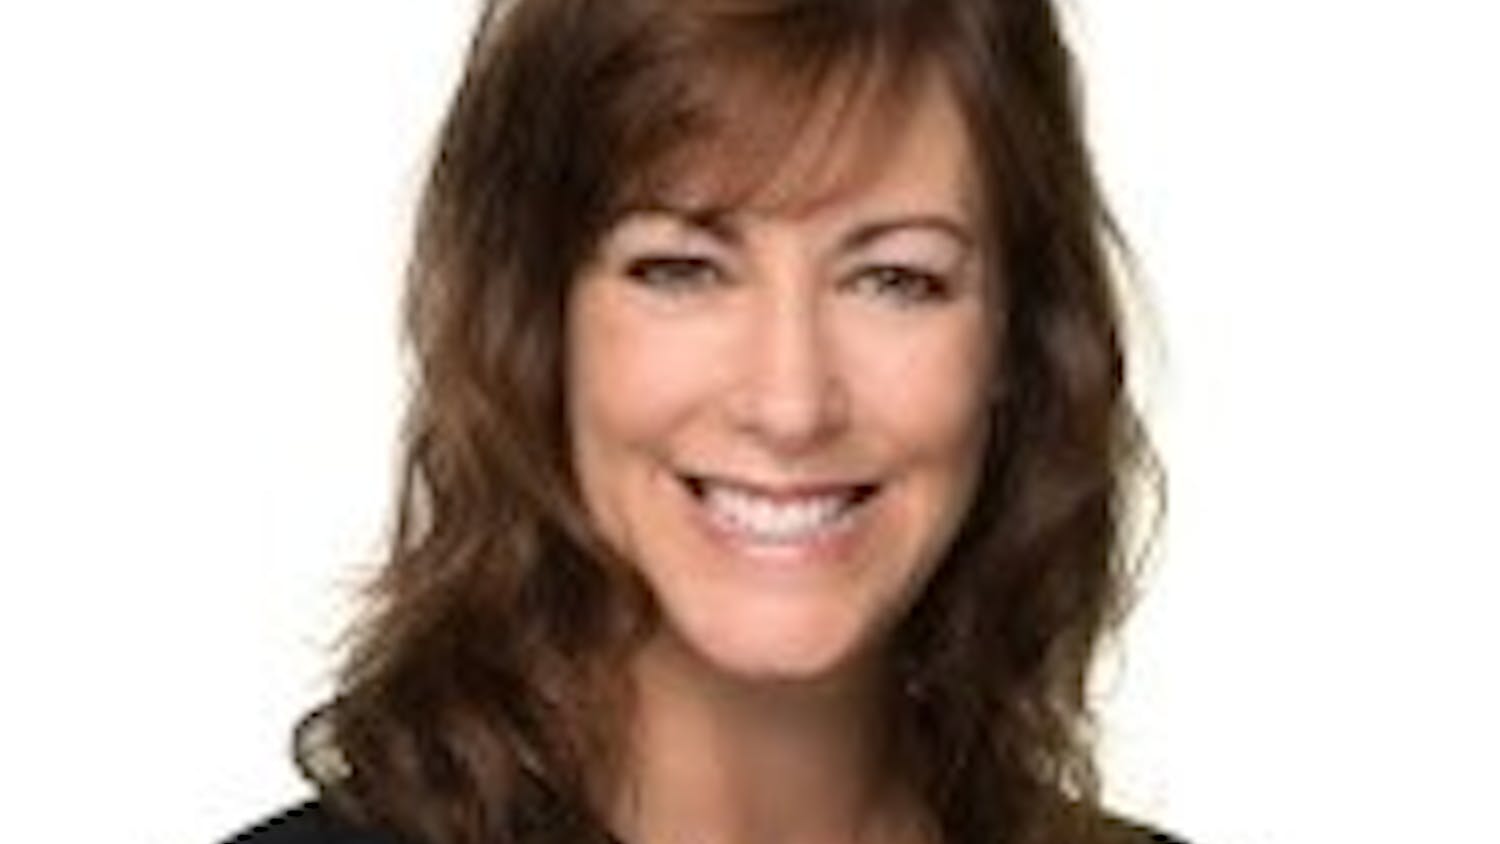 Jennifer Walthall, Indiana University School of Medicine professor and secretary of the Indiana Family and Social Services Administration, will offer keynote remarks during the inaugural Opioid Management Summit on Feb. 27 in Washington, D.C.&nbsp;